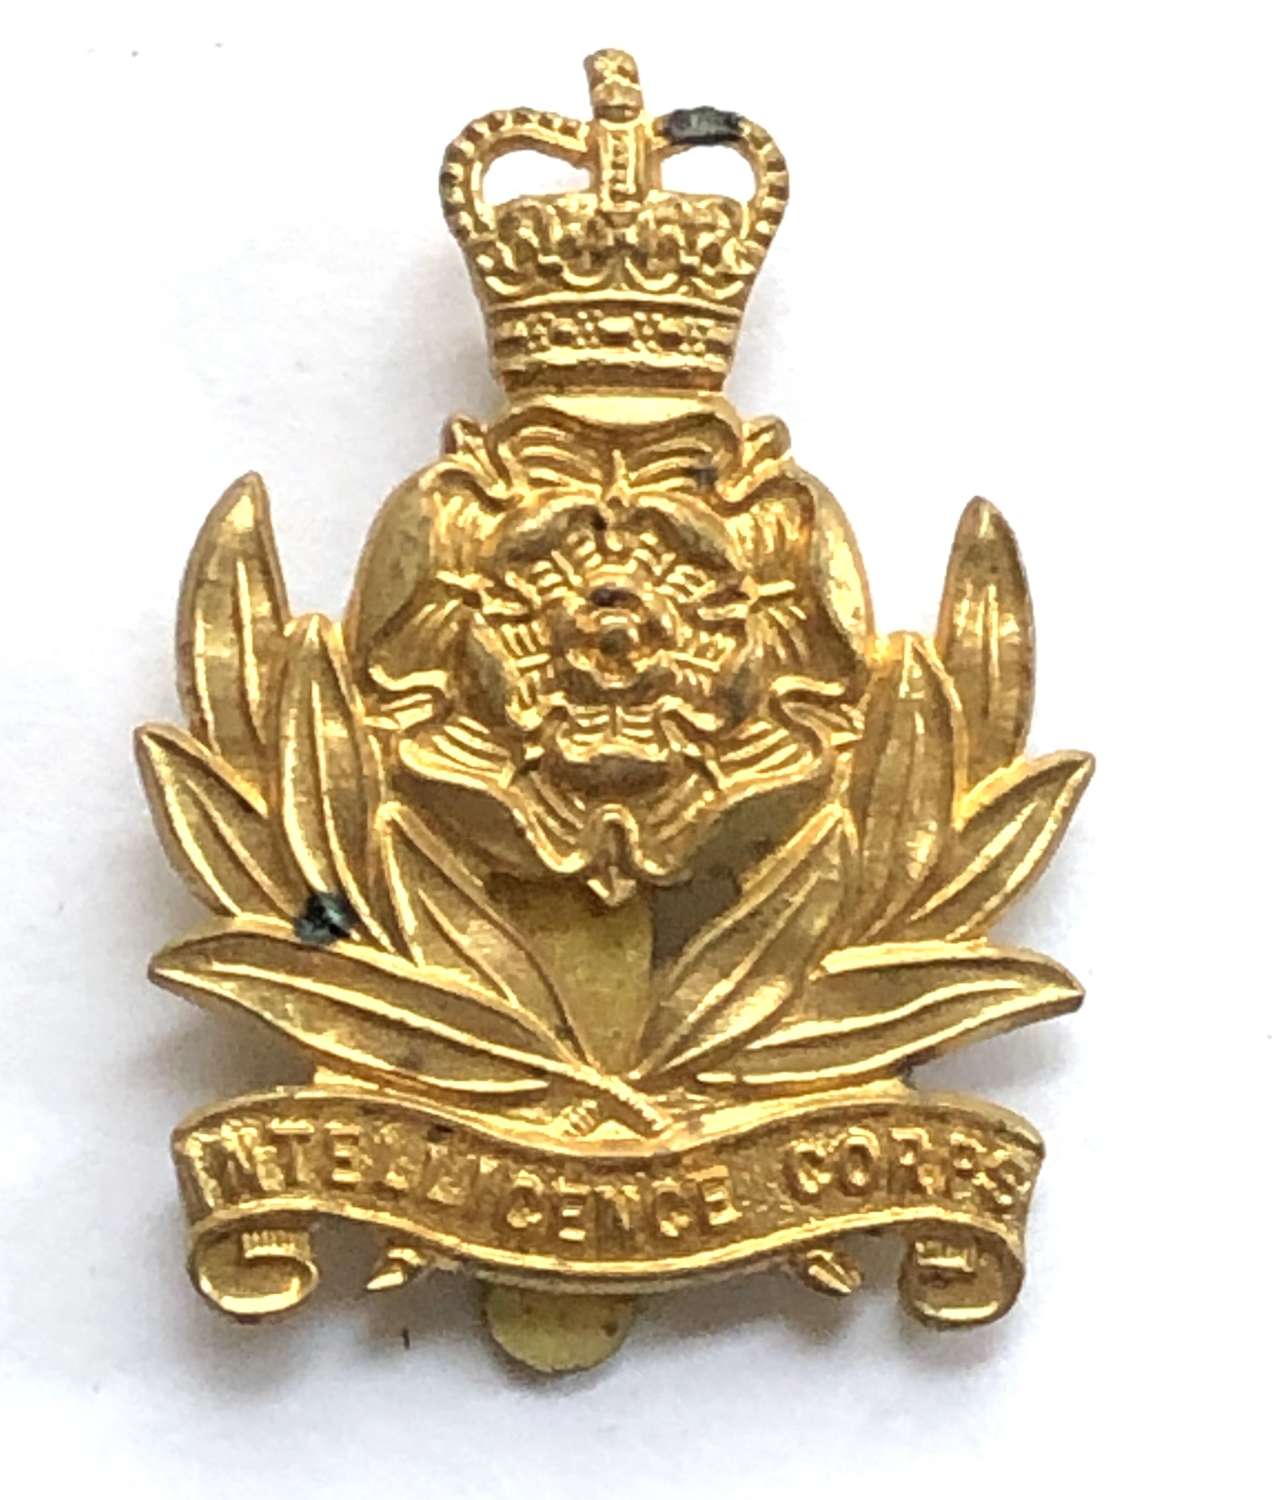 Intelligence Corps 1950's brass cap badge by Gaunt, London